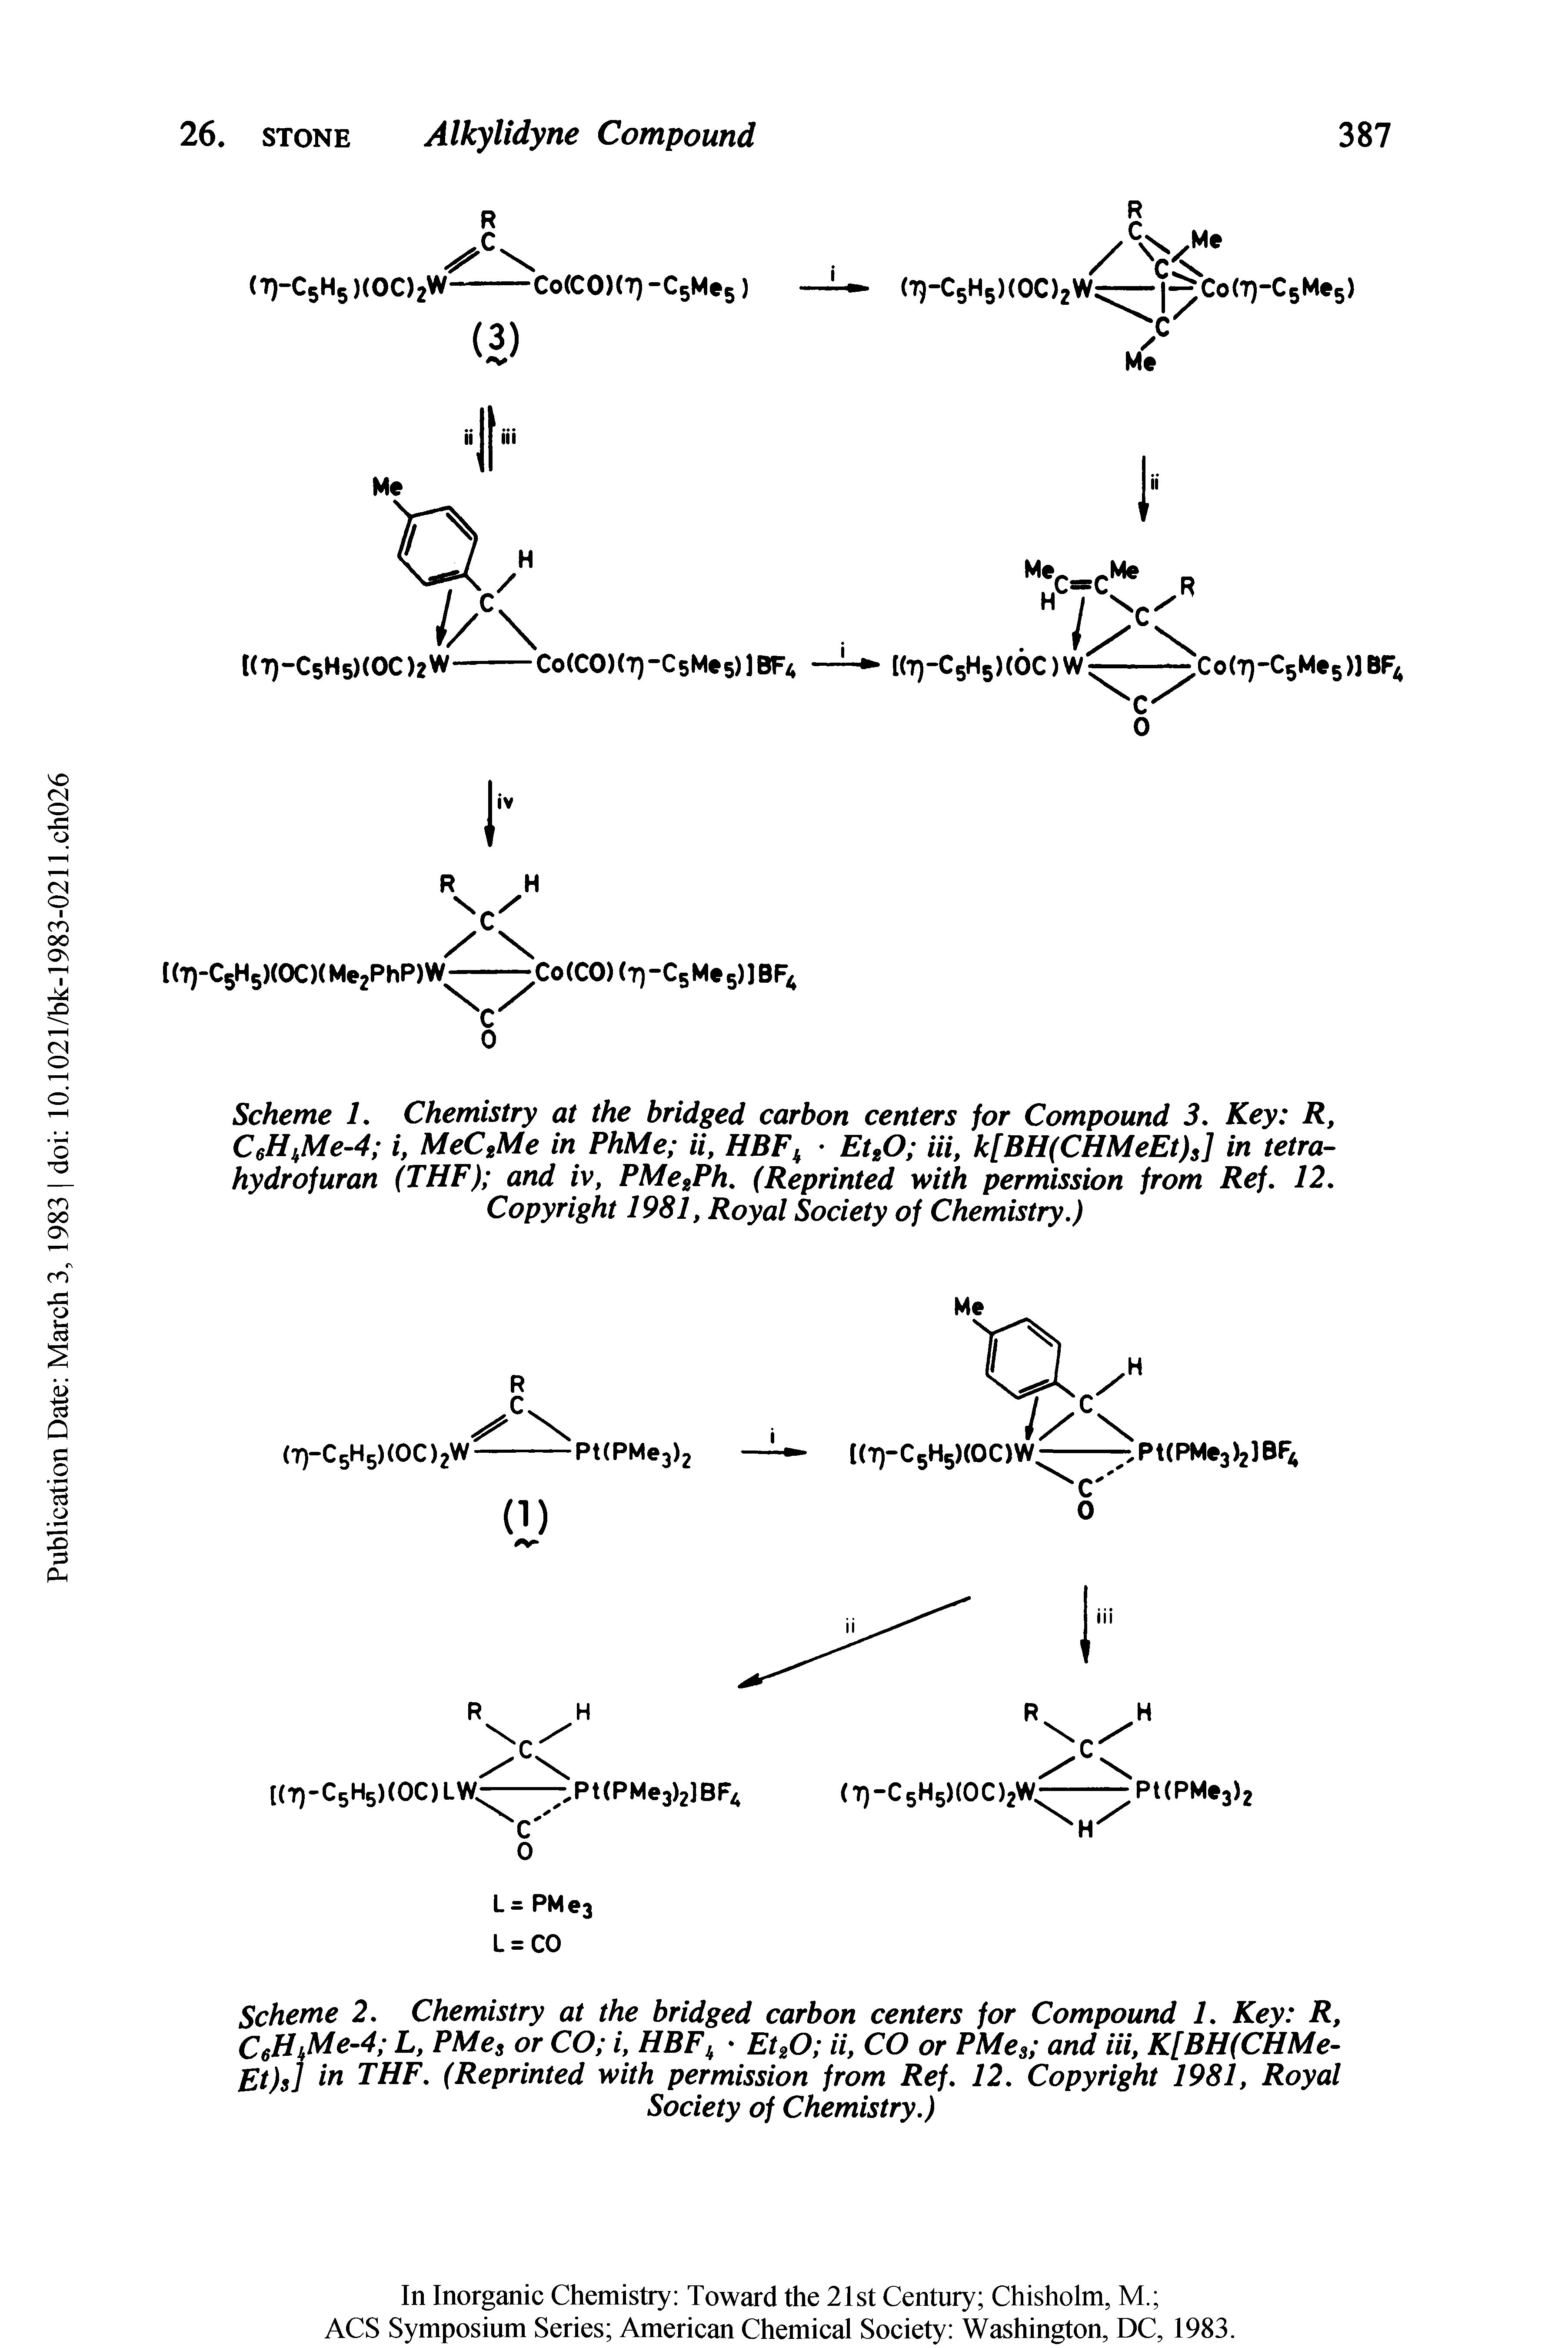 Scheme 1. Chemistry at the bridged carbon centers for Compound 3. Key R, CeH Me-4 i, MeC2Me in PhMe ii, HBFh EtsO iii, k[BH(CHMeEt)s] in tetra-hydrofuran (THF) and iv, PMe2Ph. (Reprinted with permission from Ref. 12. Copyright 1981, Royal Society of Chemistry.)...